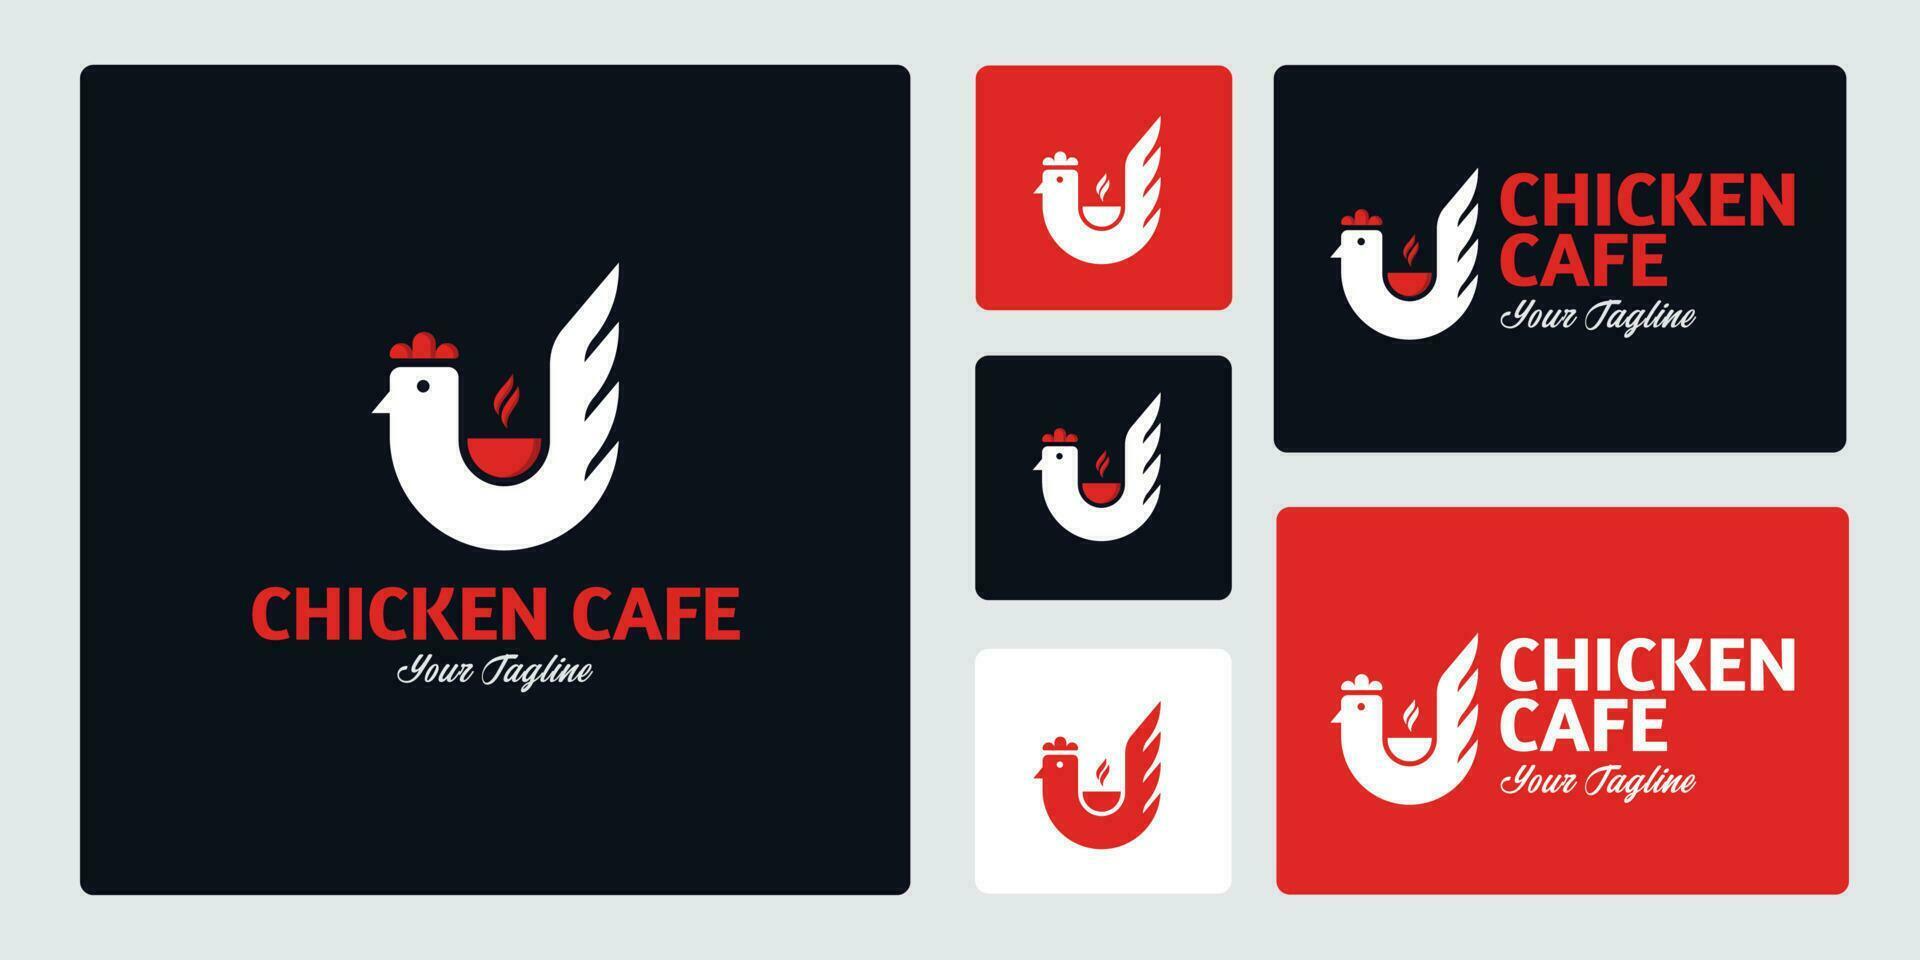 The Unique Chicken Cafe Logo is a combination of a Chicken Shape and a Coffee Cup, This Logo Can be Used for Coffee Shops, Cafes, Restaurants, or Other Brands with a Chicken Theme. vector